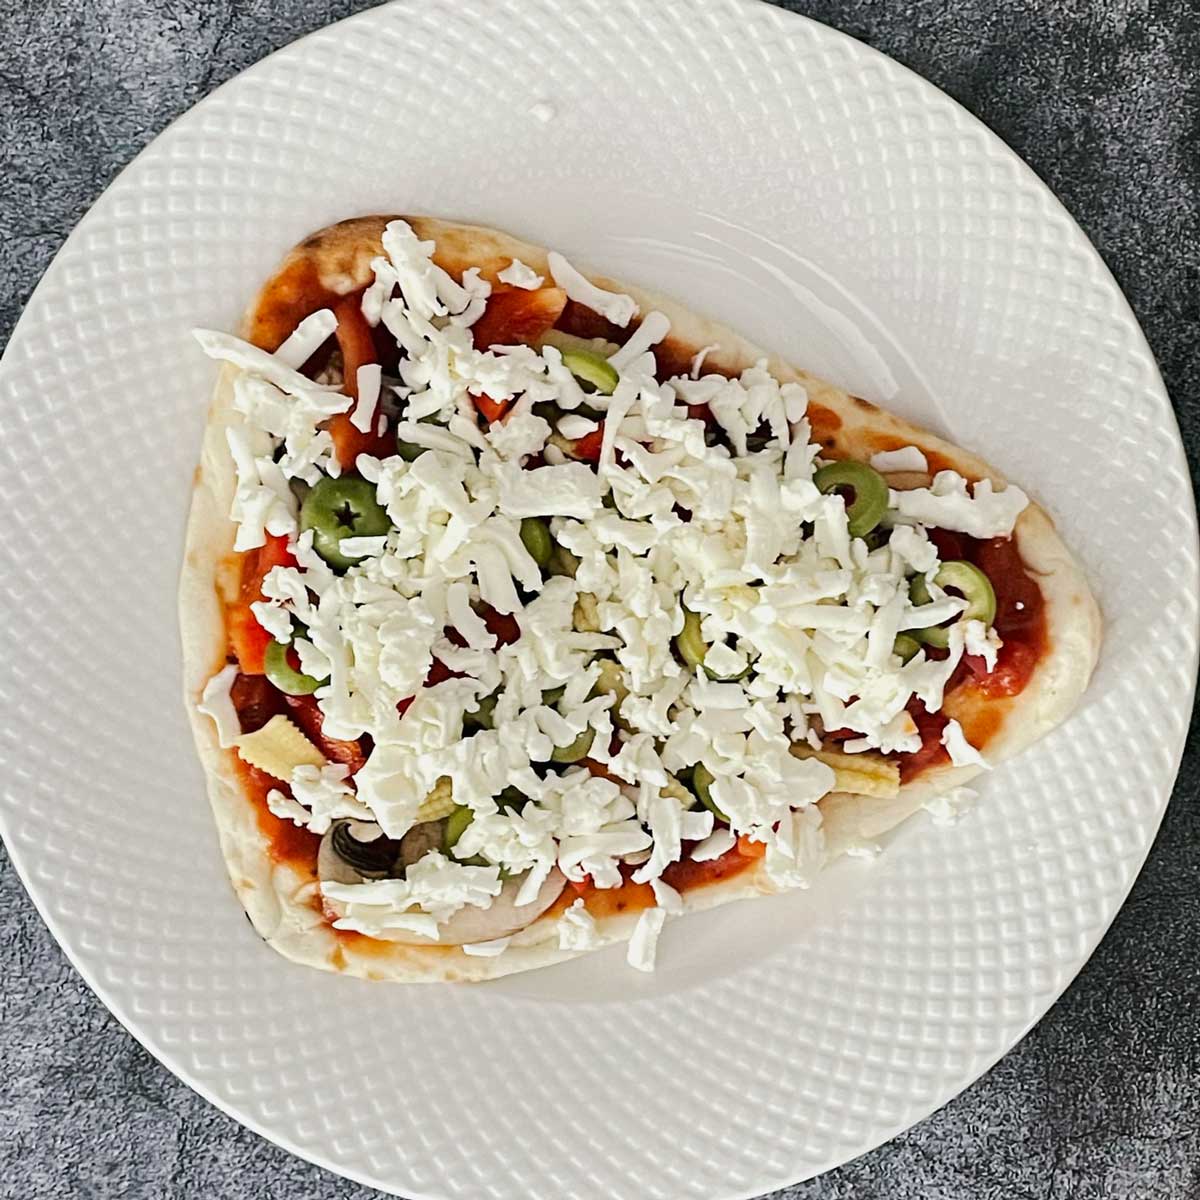 Naan pizza with veggies and cheese toppings.